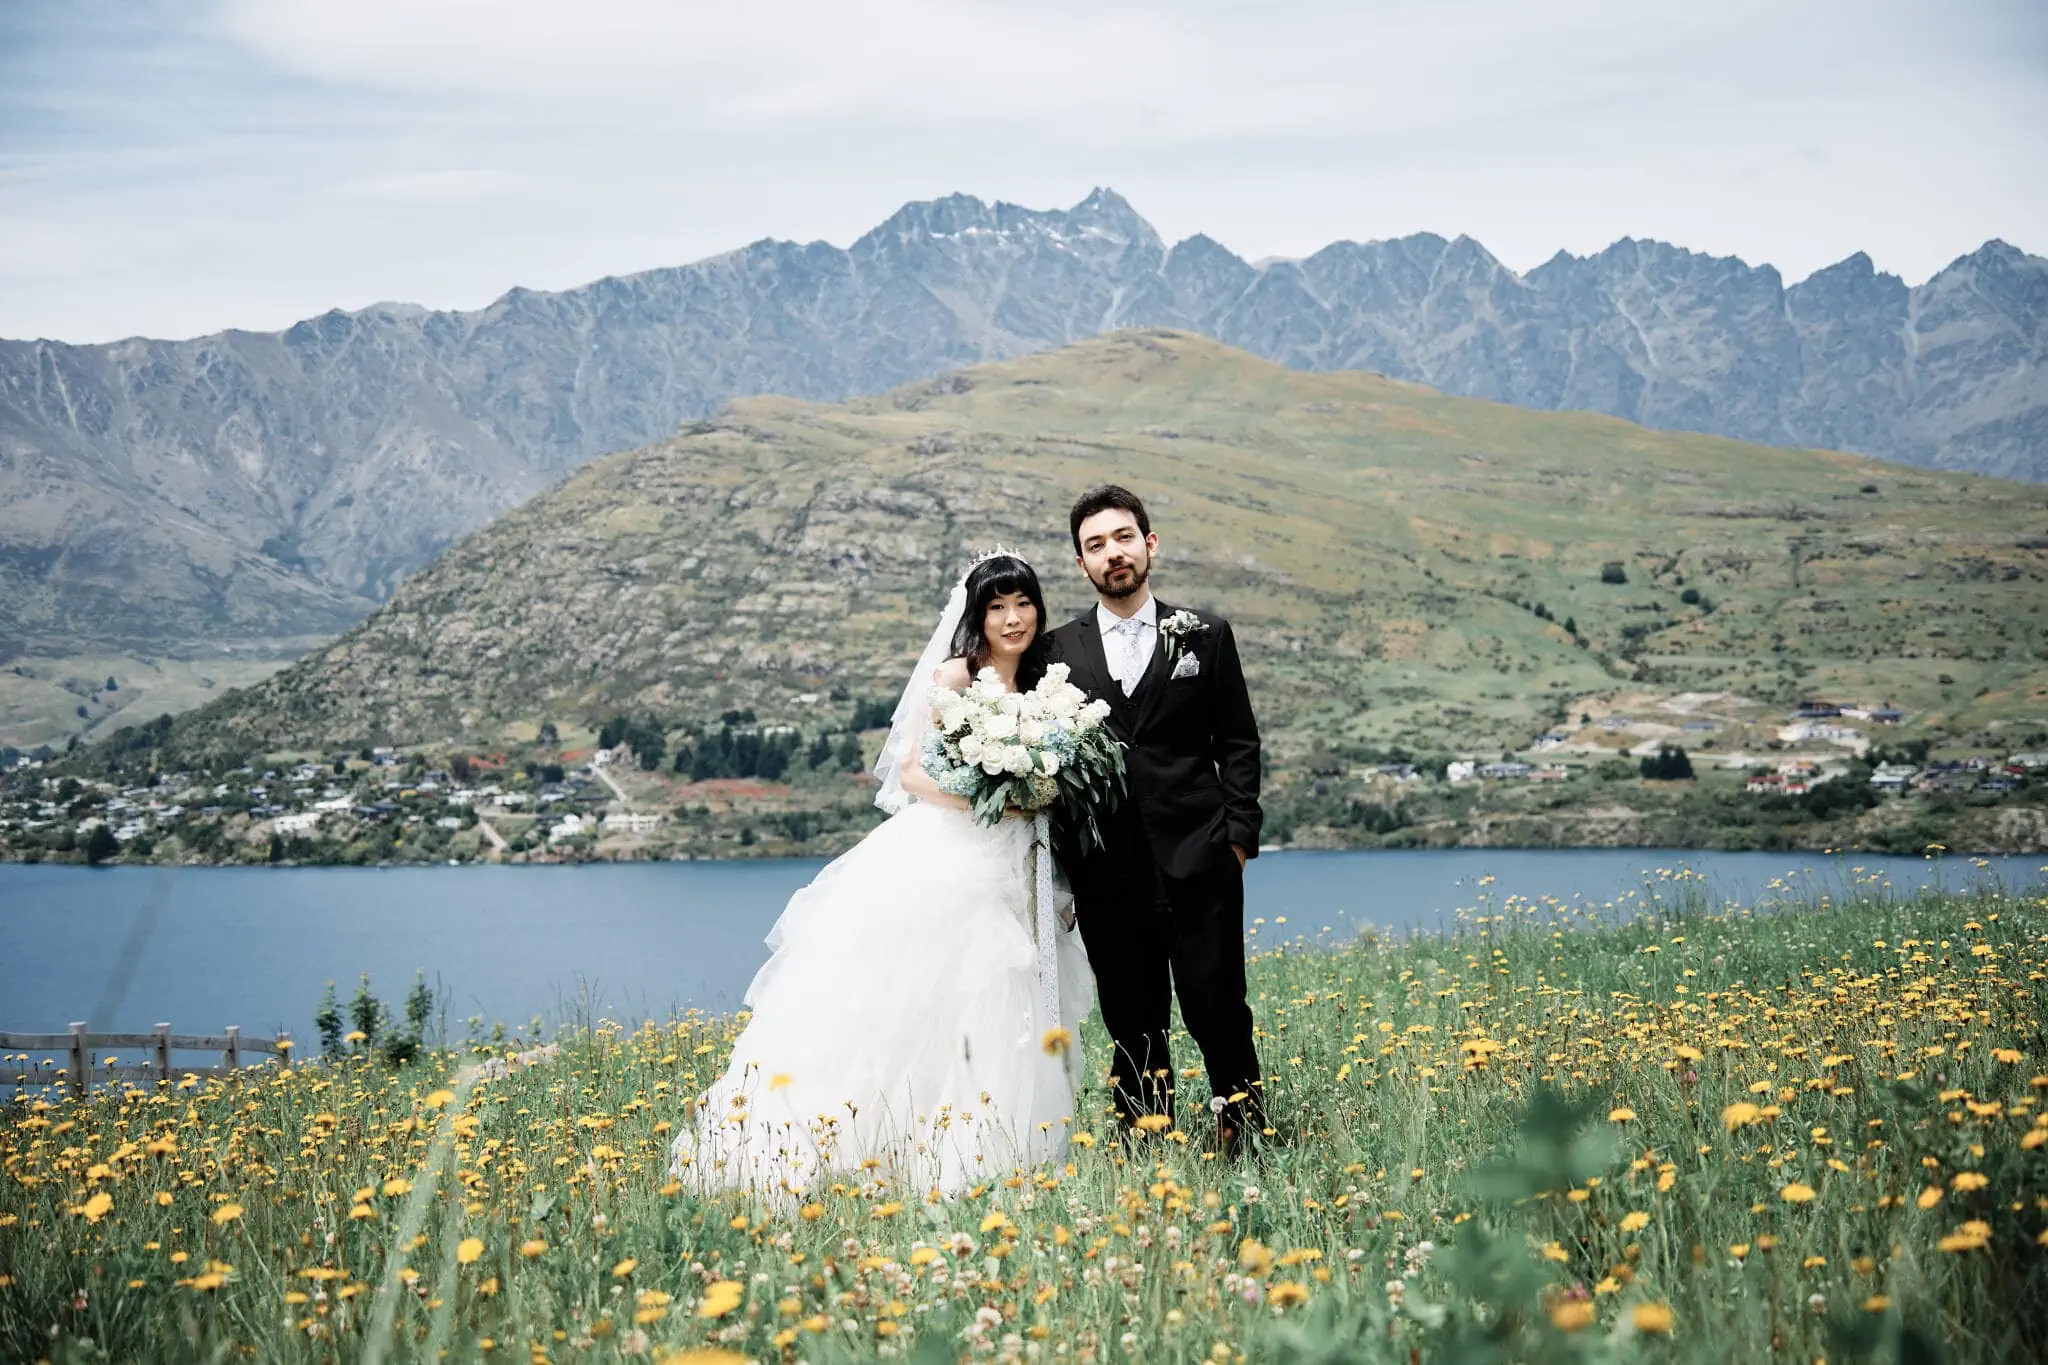 Carlos and Wanzhu's intimate elopement wedding on Cecil Peak with mountains in the background.